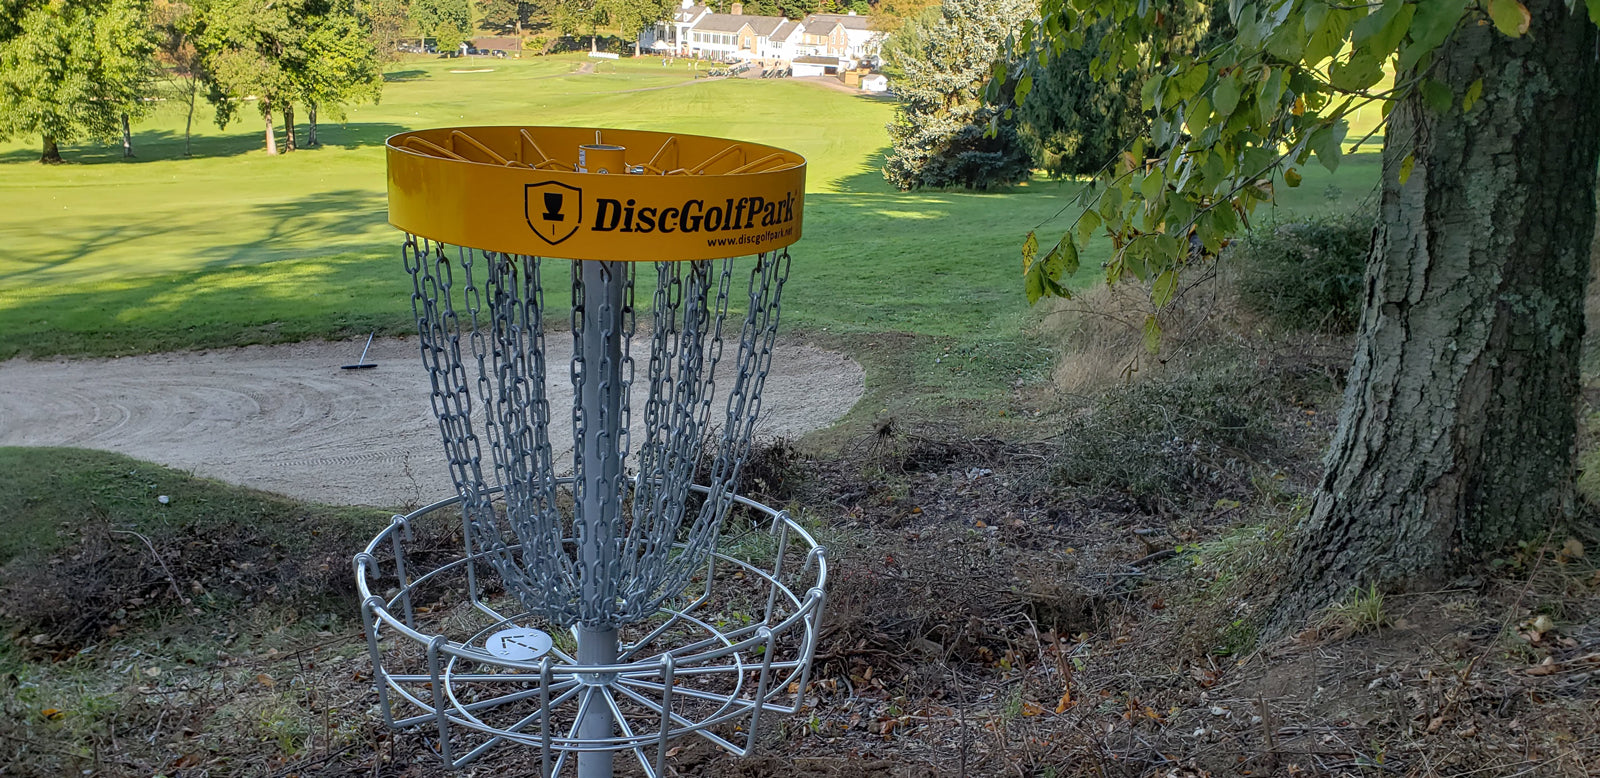 Steel Club houses complete Championship level DiscGolfPark®